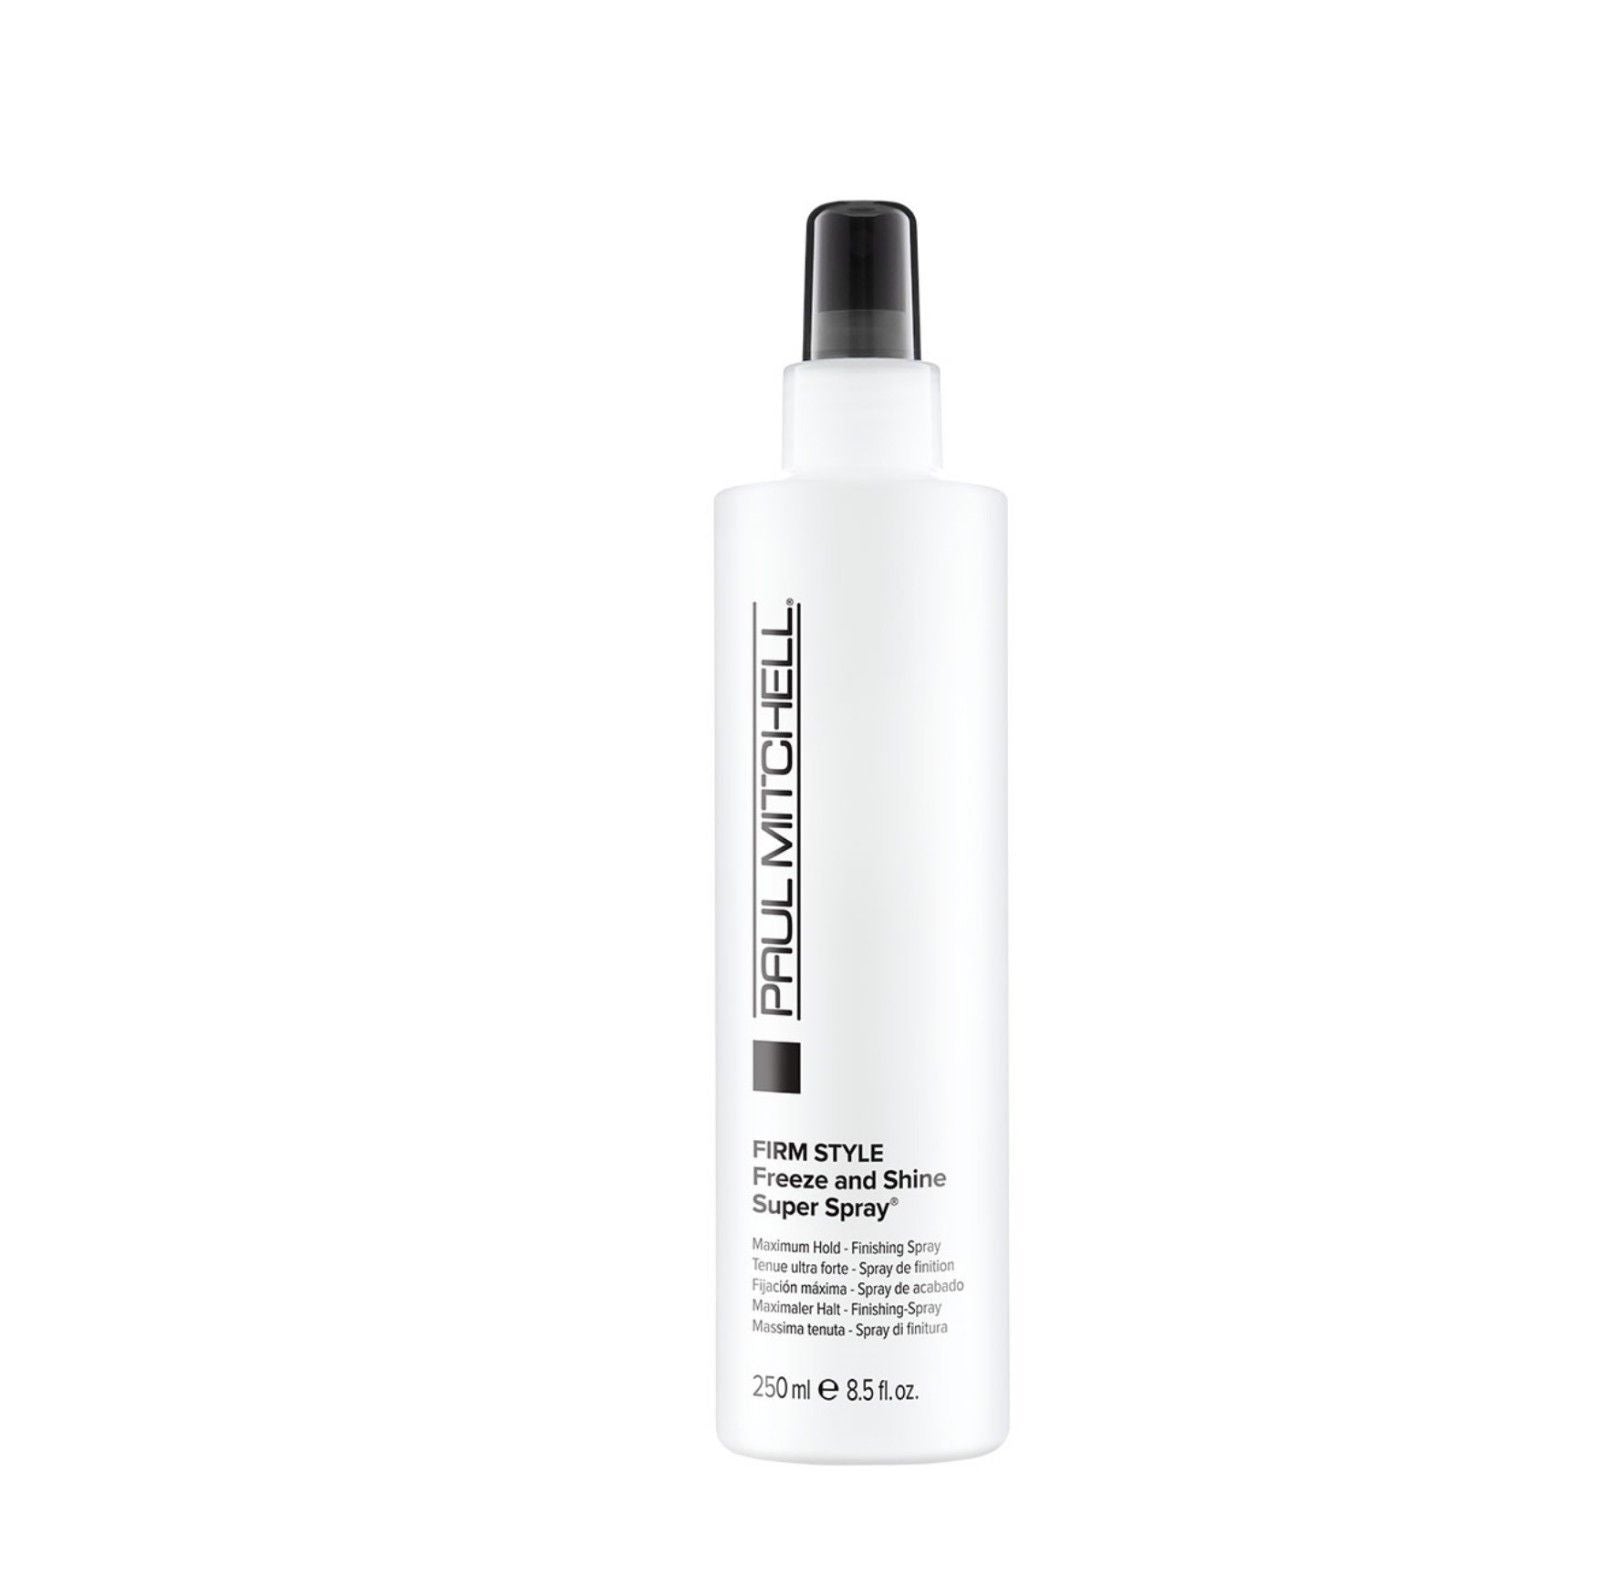 Paul Mitchell Firm Style Freeze and Shine Super Spray Maximum Hold 250ml Paul Mitchell Styling - On Line Hair Depot